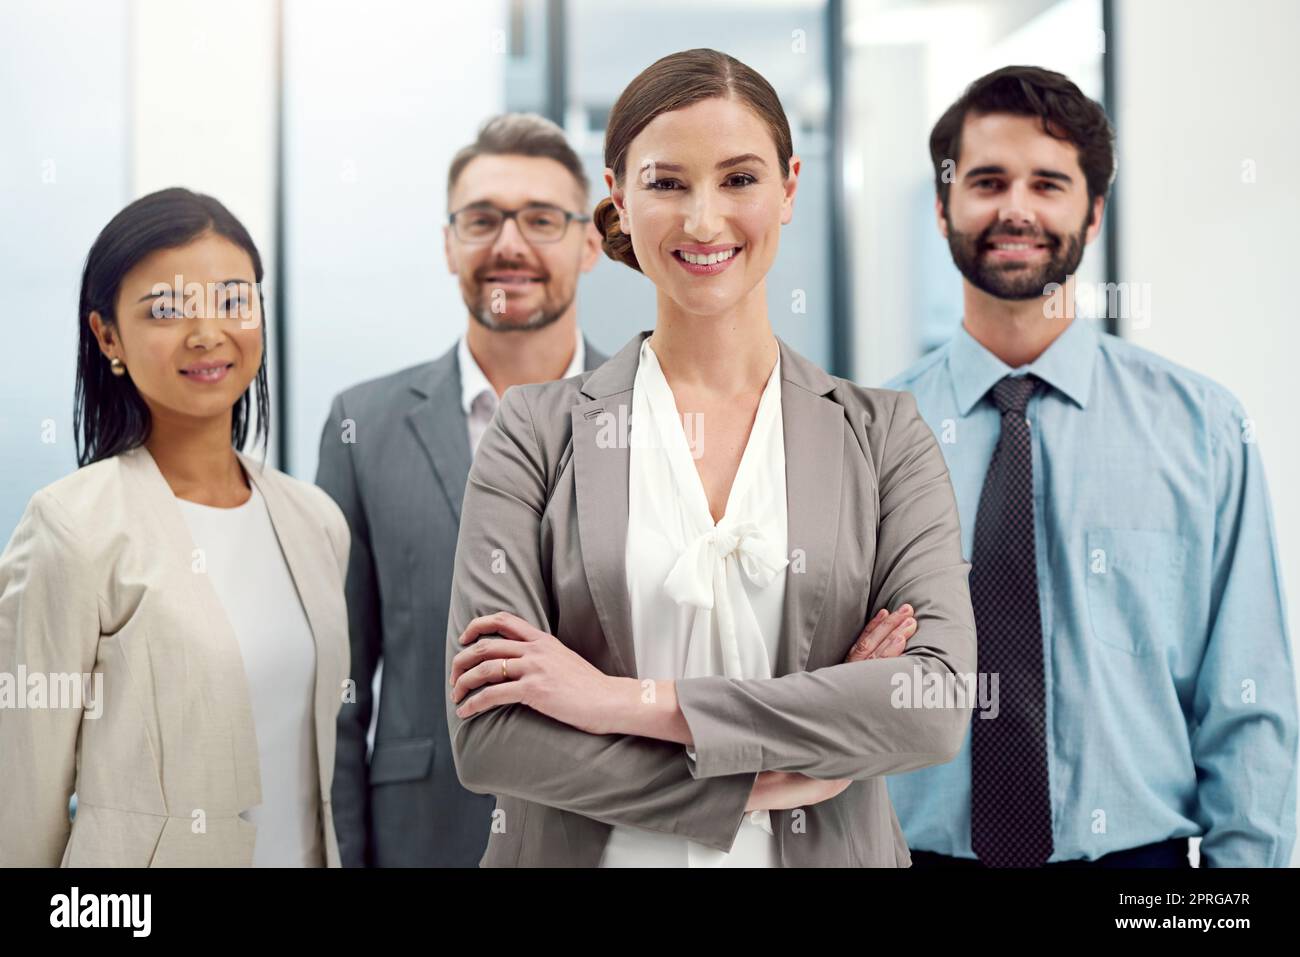 Trust the experts. Portrait of a group of businesspeople standing together in a modern office. Stock Photo